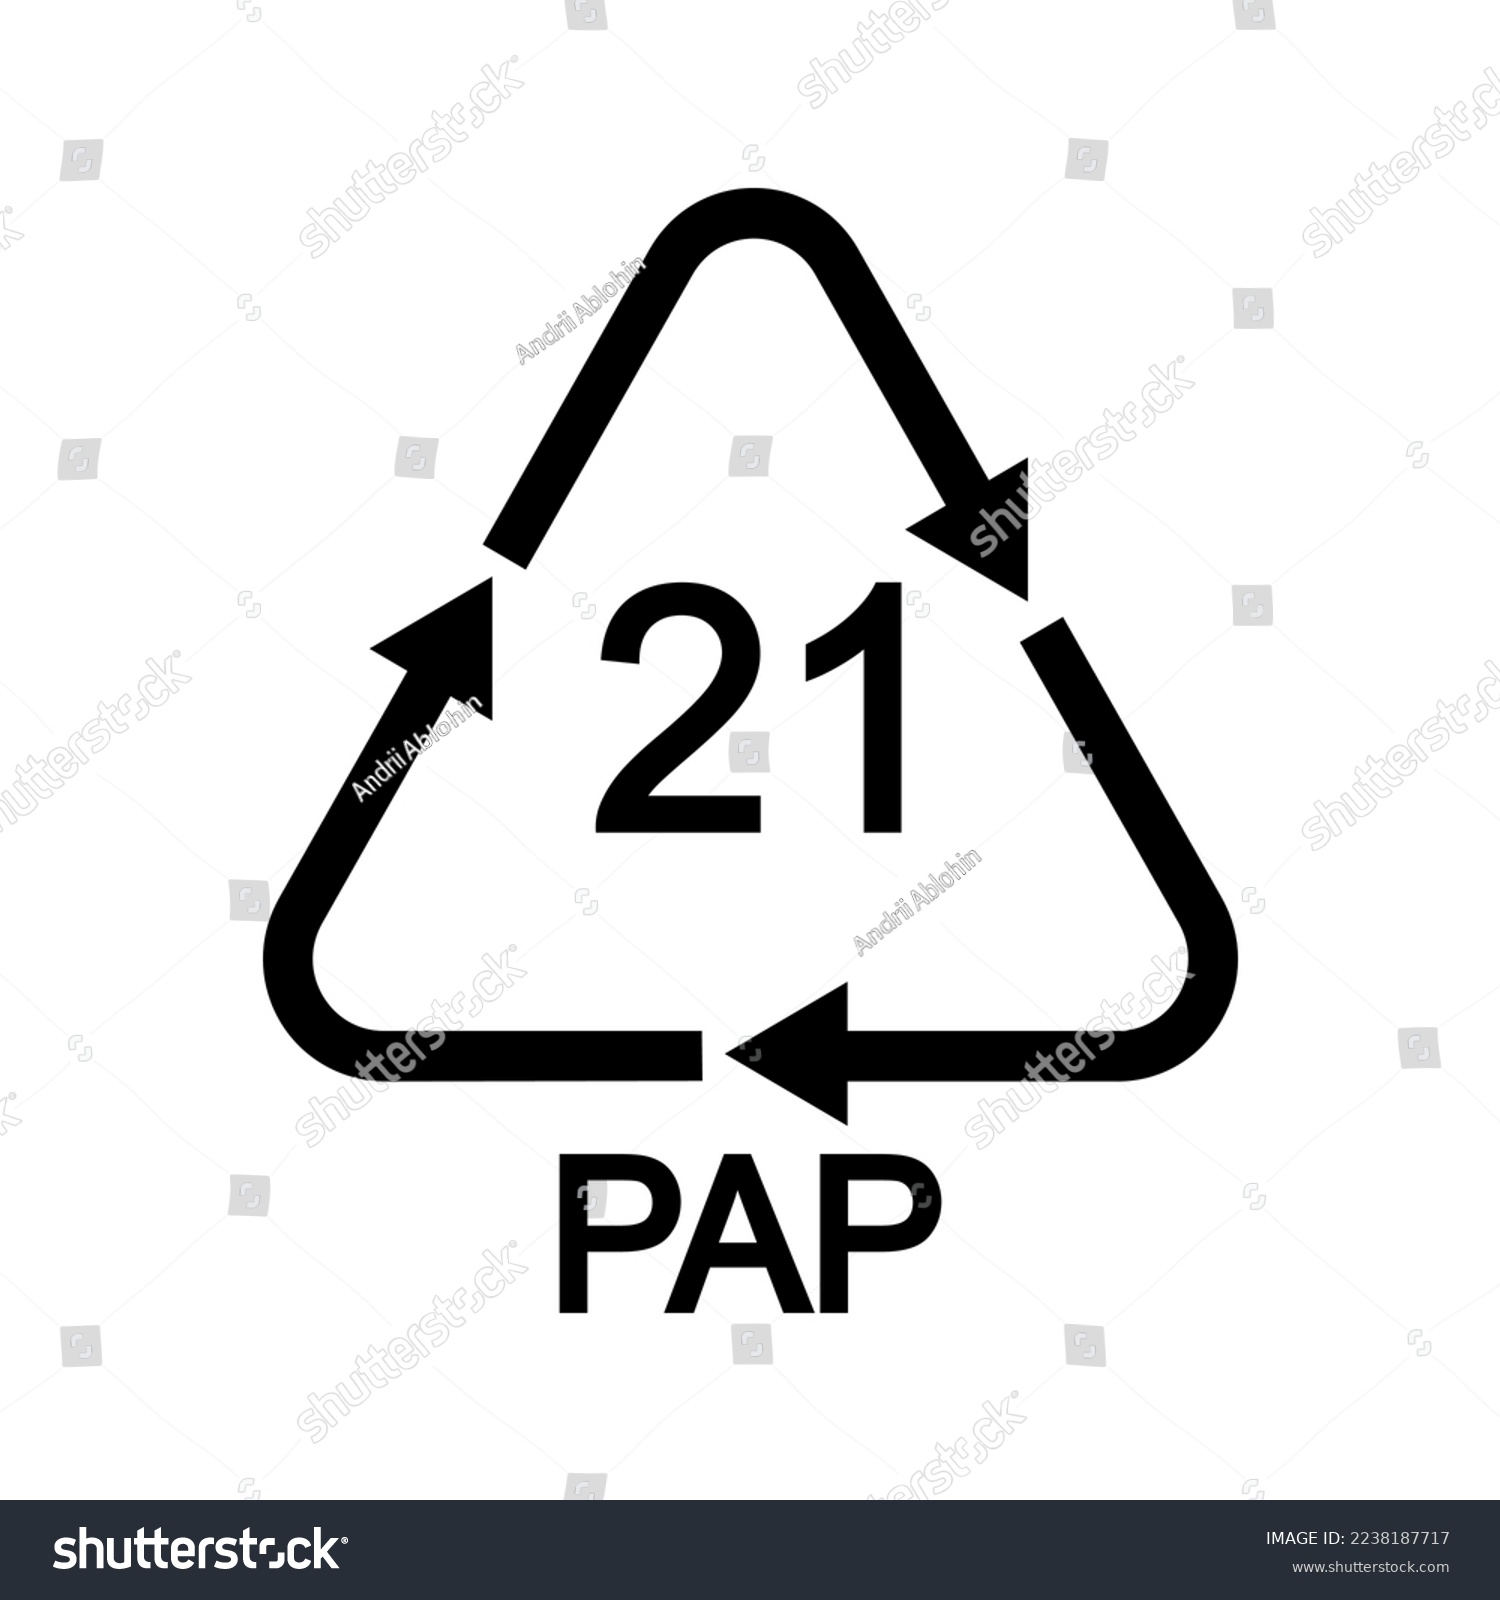 SVG of Paper or cardboard recycling sign. 21 PAP in triangular shape with arrows. Reusable icon isolated on white background. Environmental protection pictogram. Vector graphic illustration svg